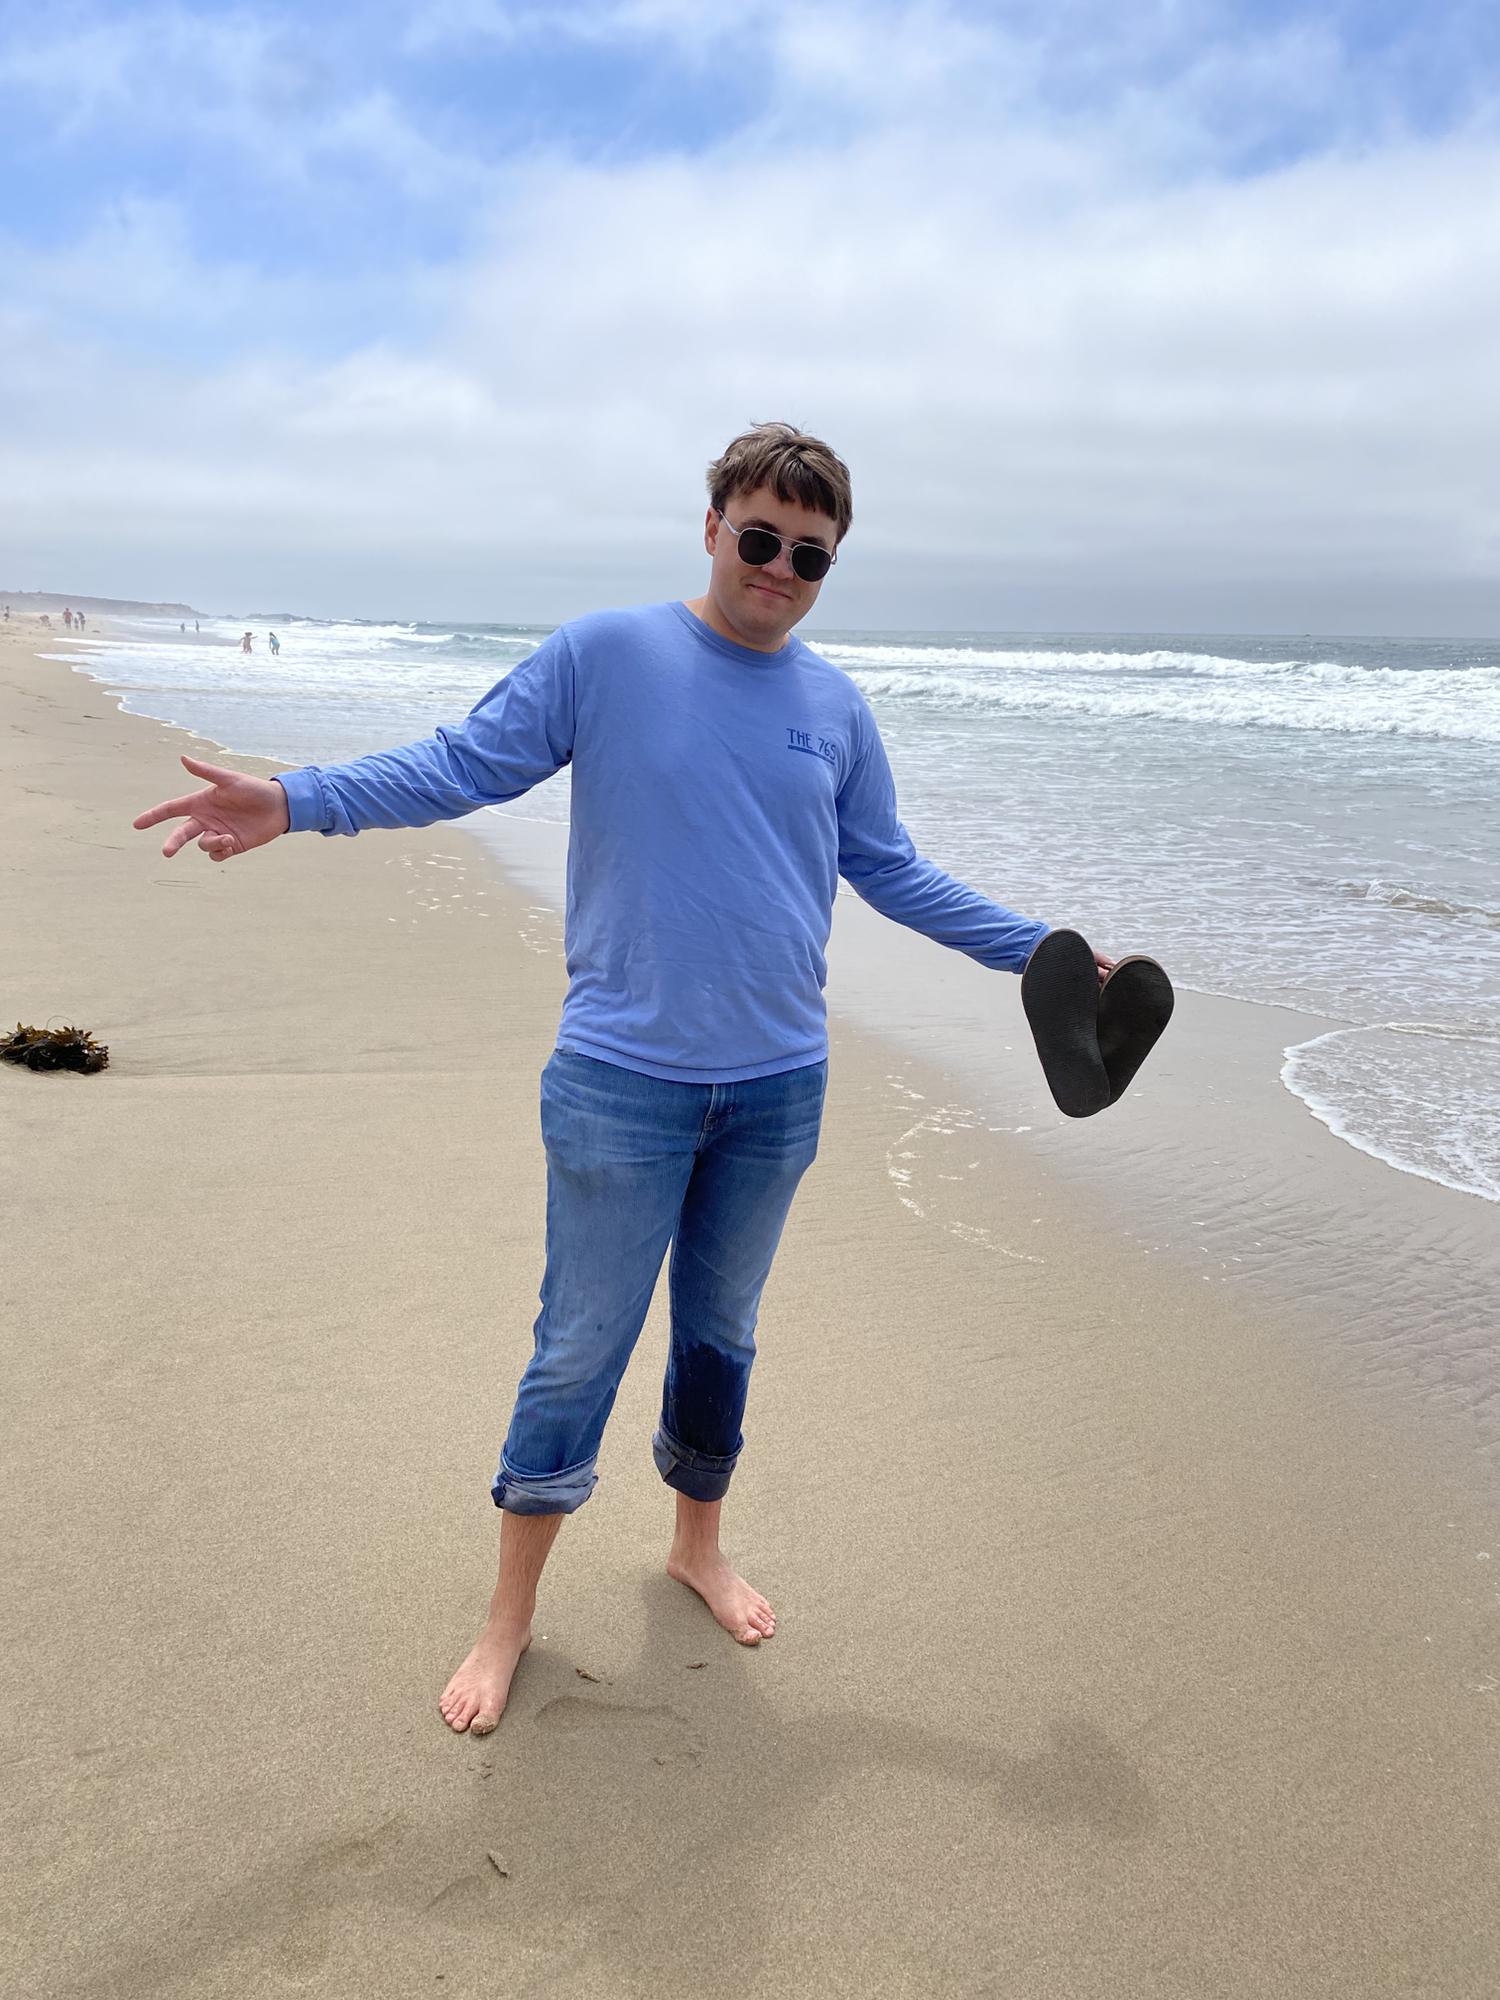 Getting a bit too close to the ocean in Half Moon Bay! July 2021